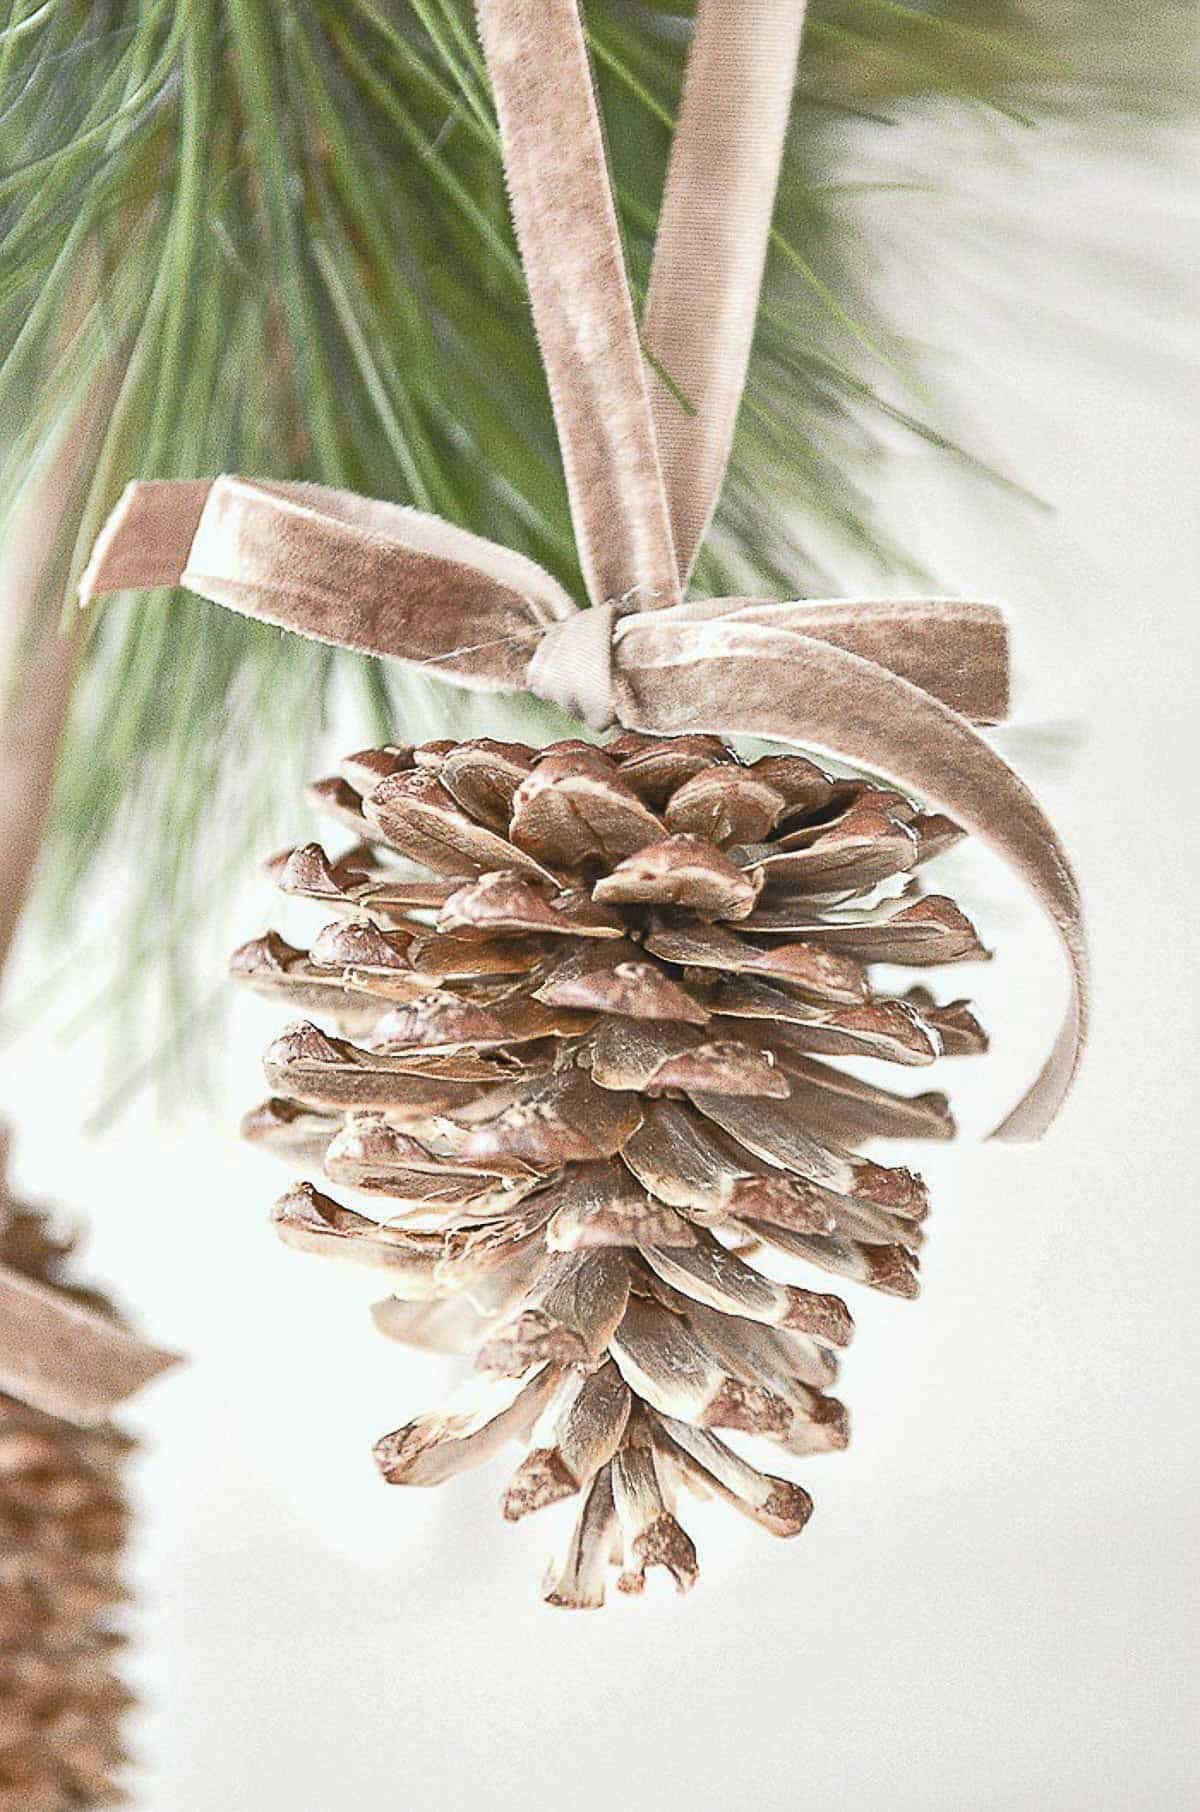 Decorating With Pinecones At Christmas: The Festive Ultimate Guide -  StoneGable